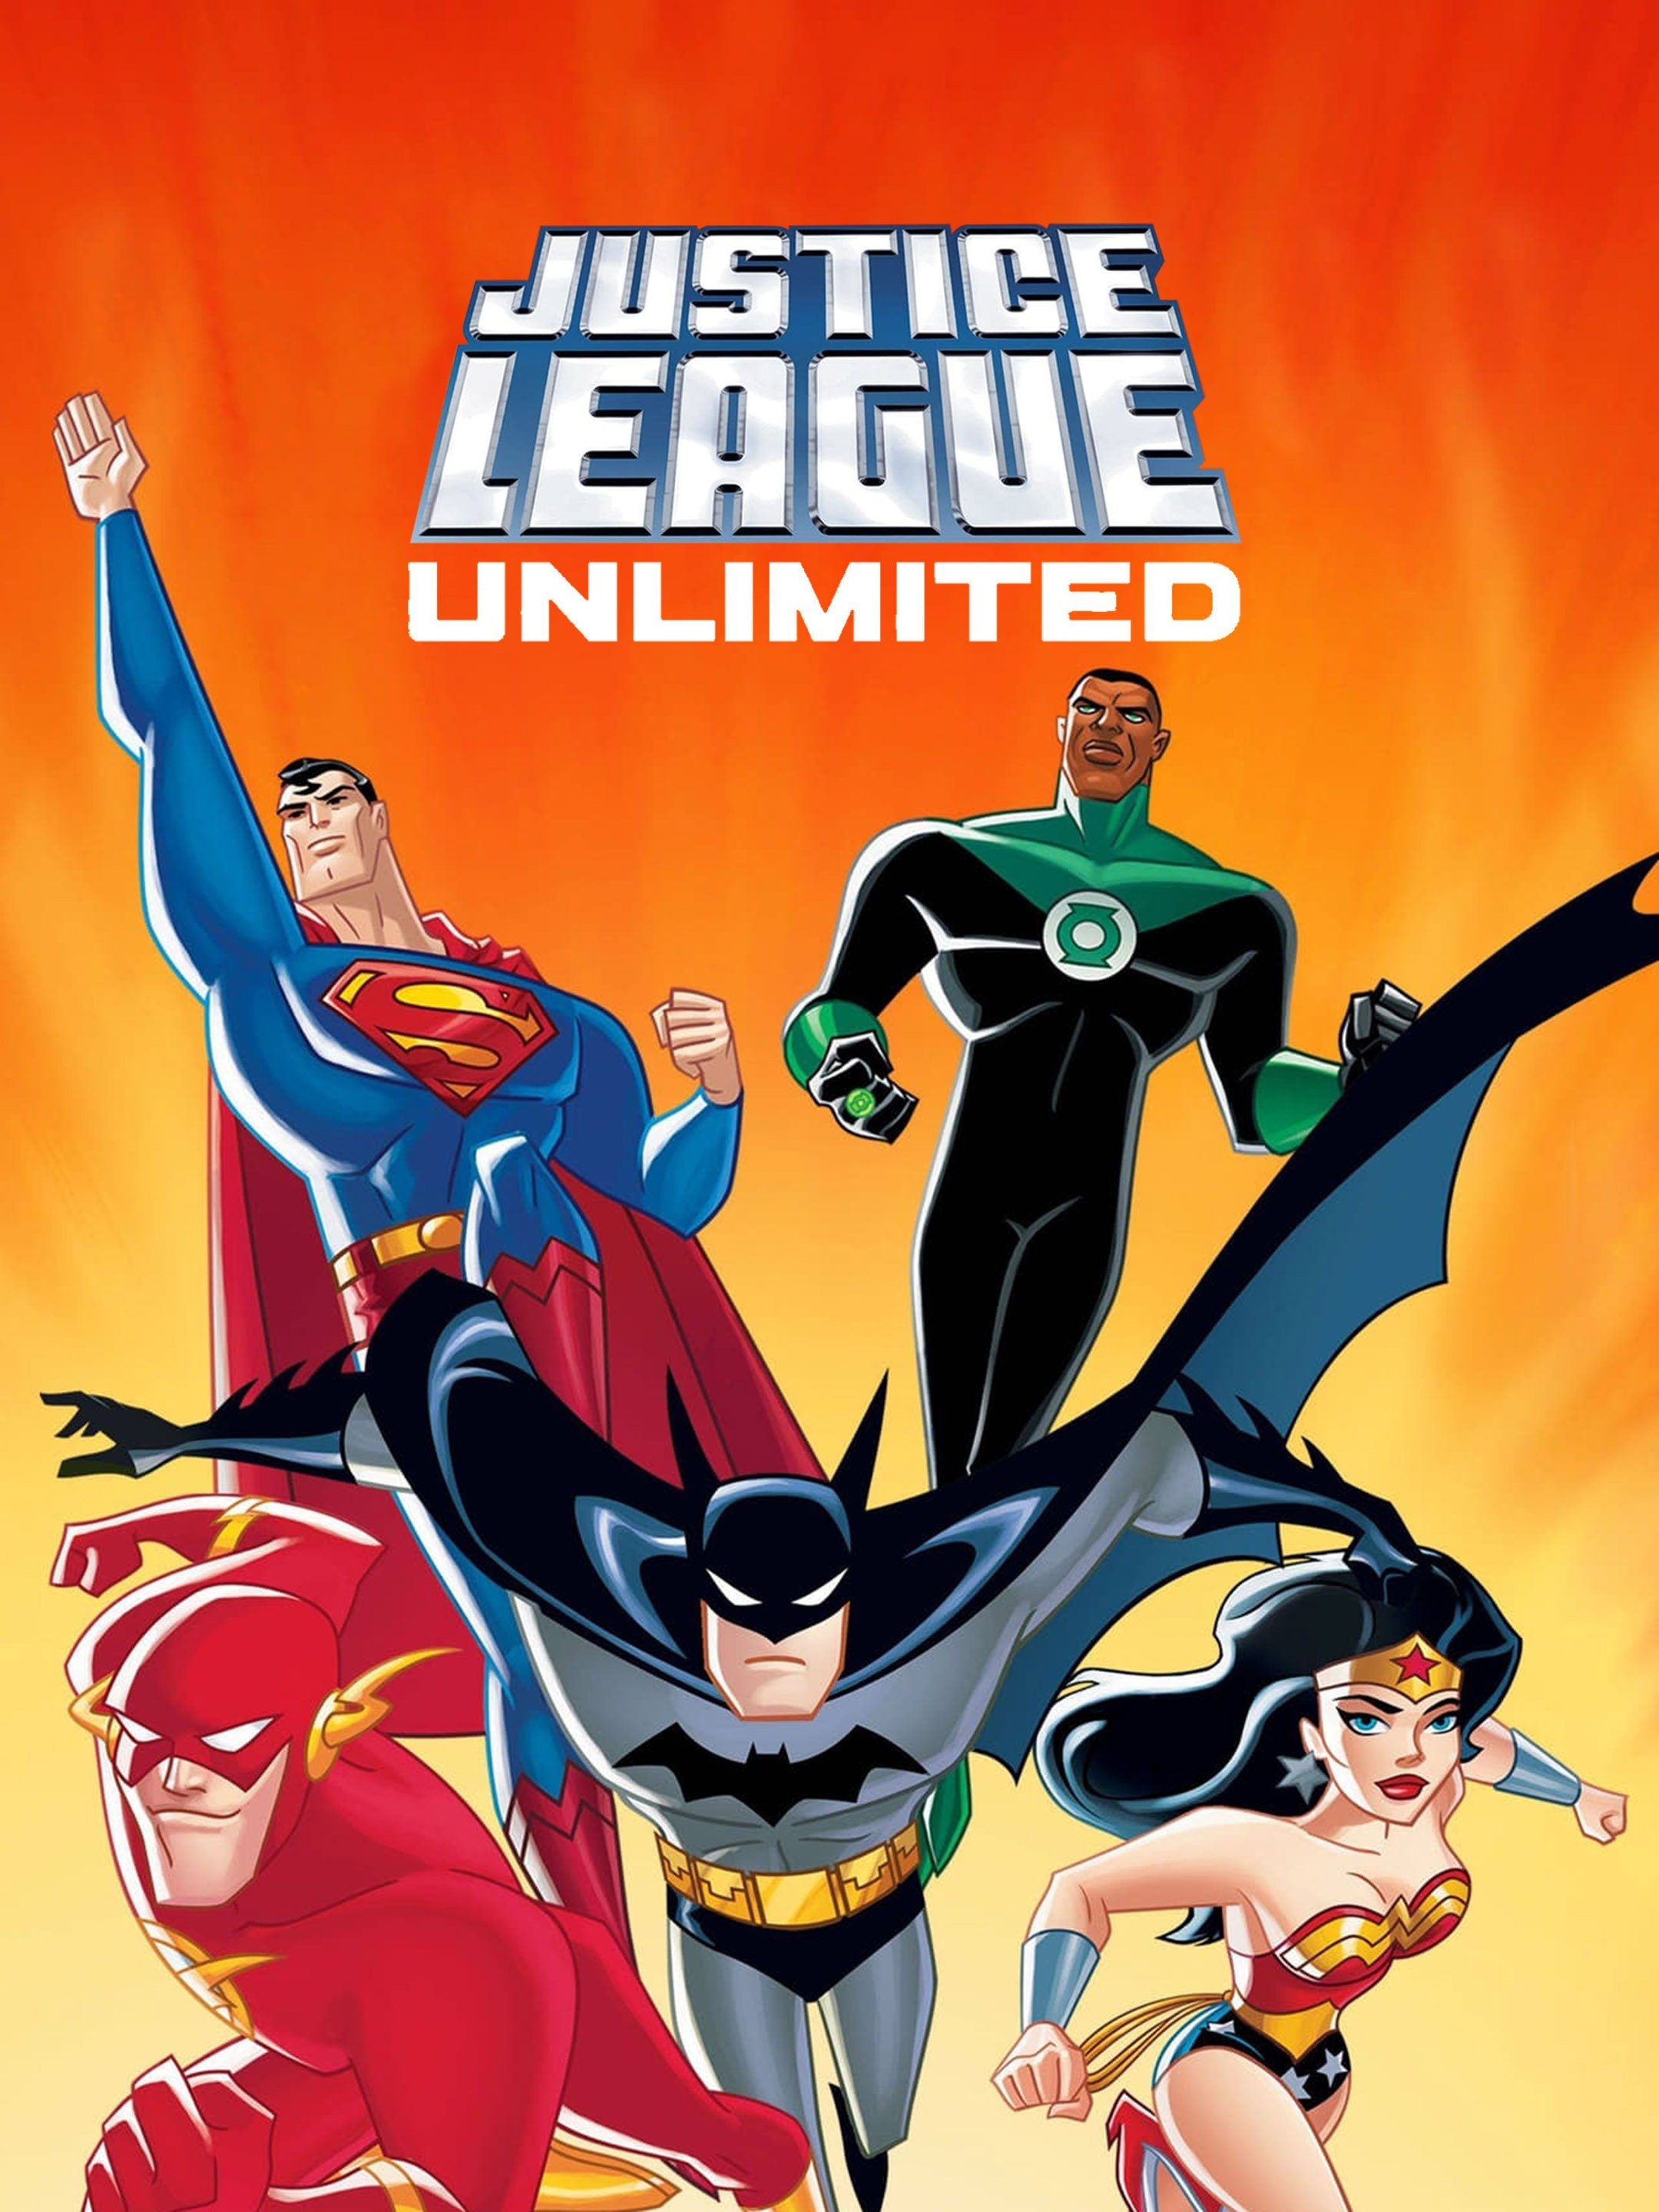 Justice league or justice league unlimited